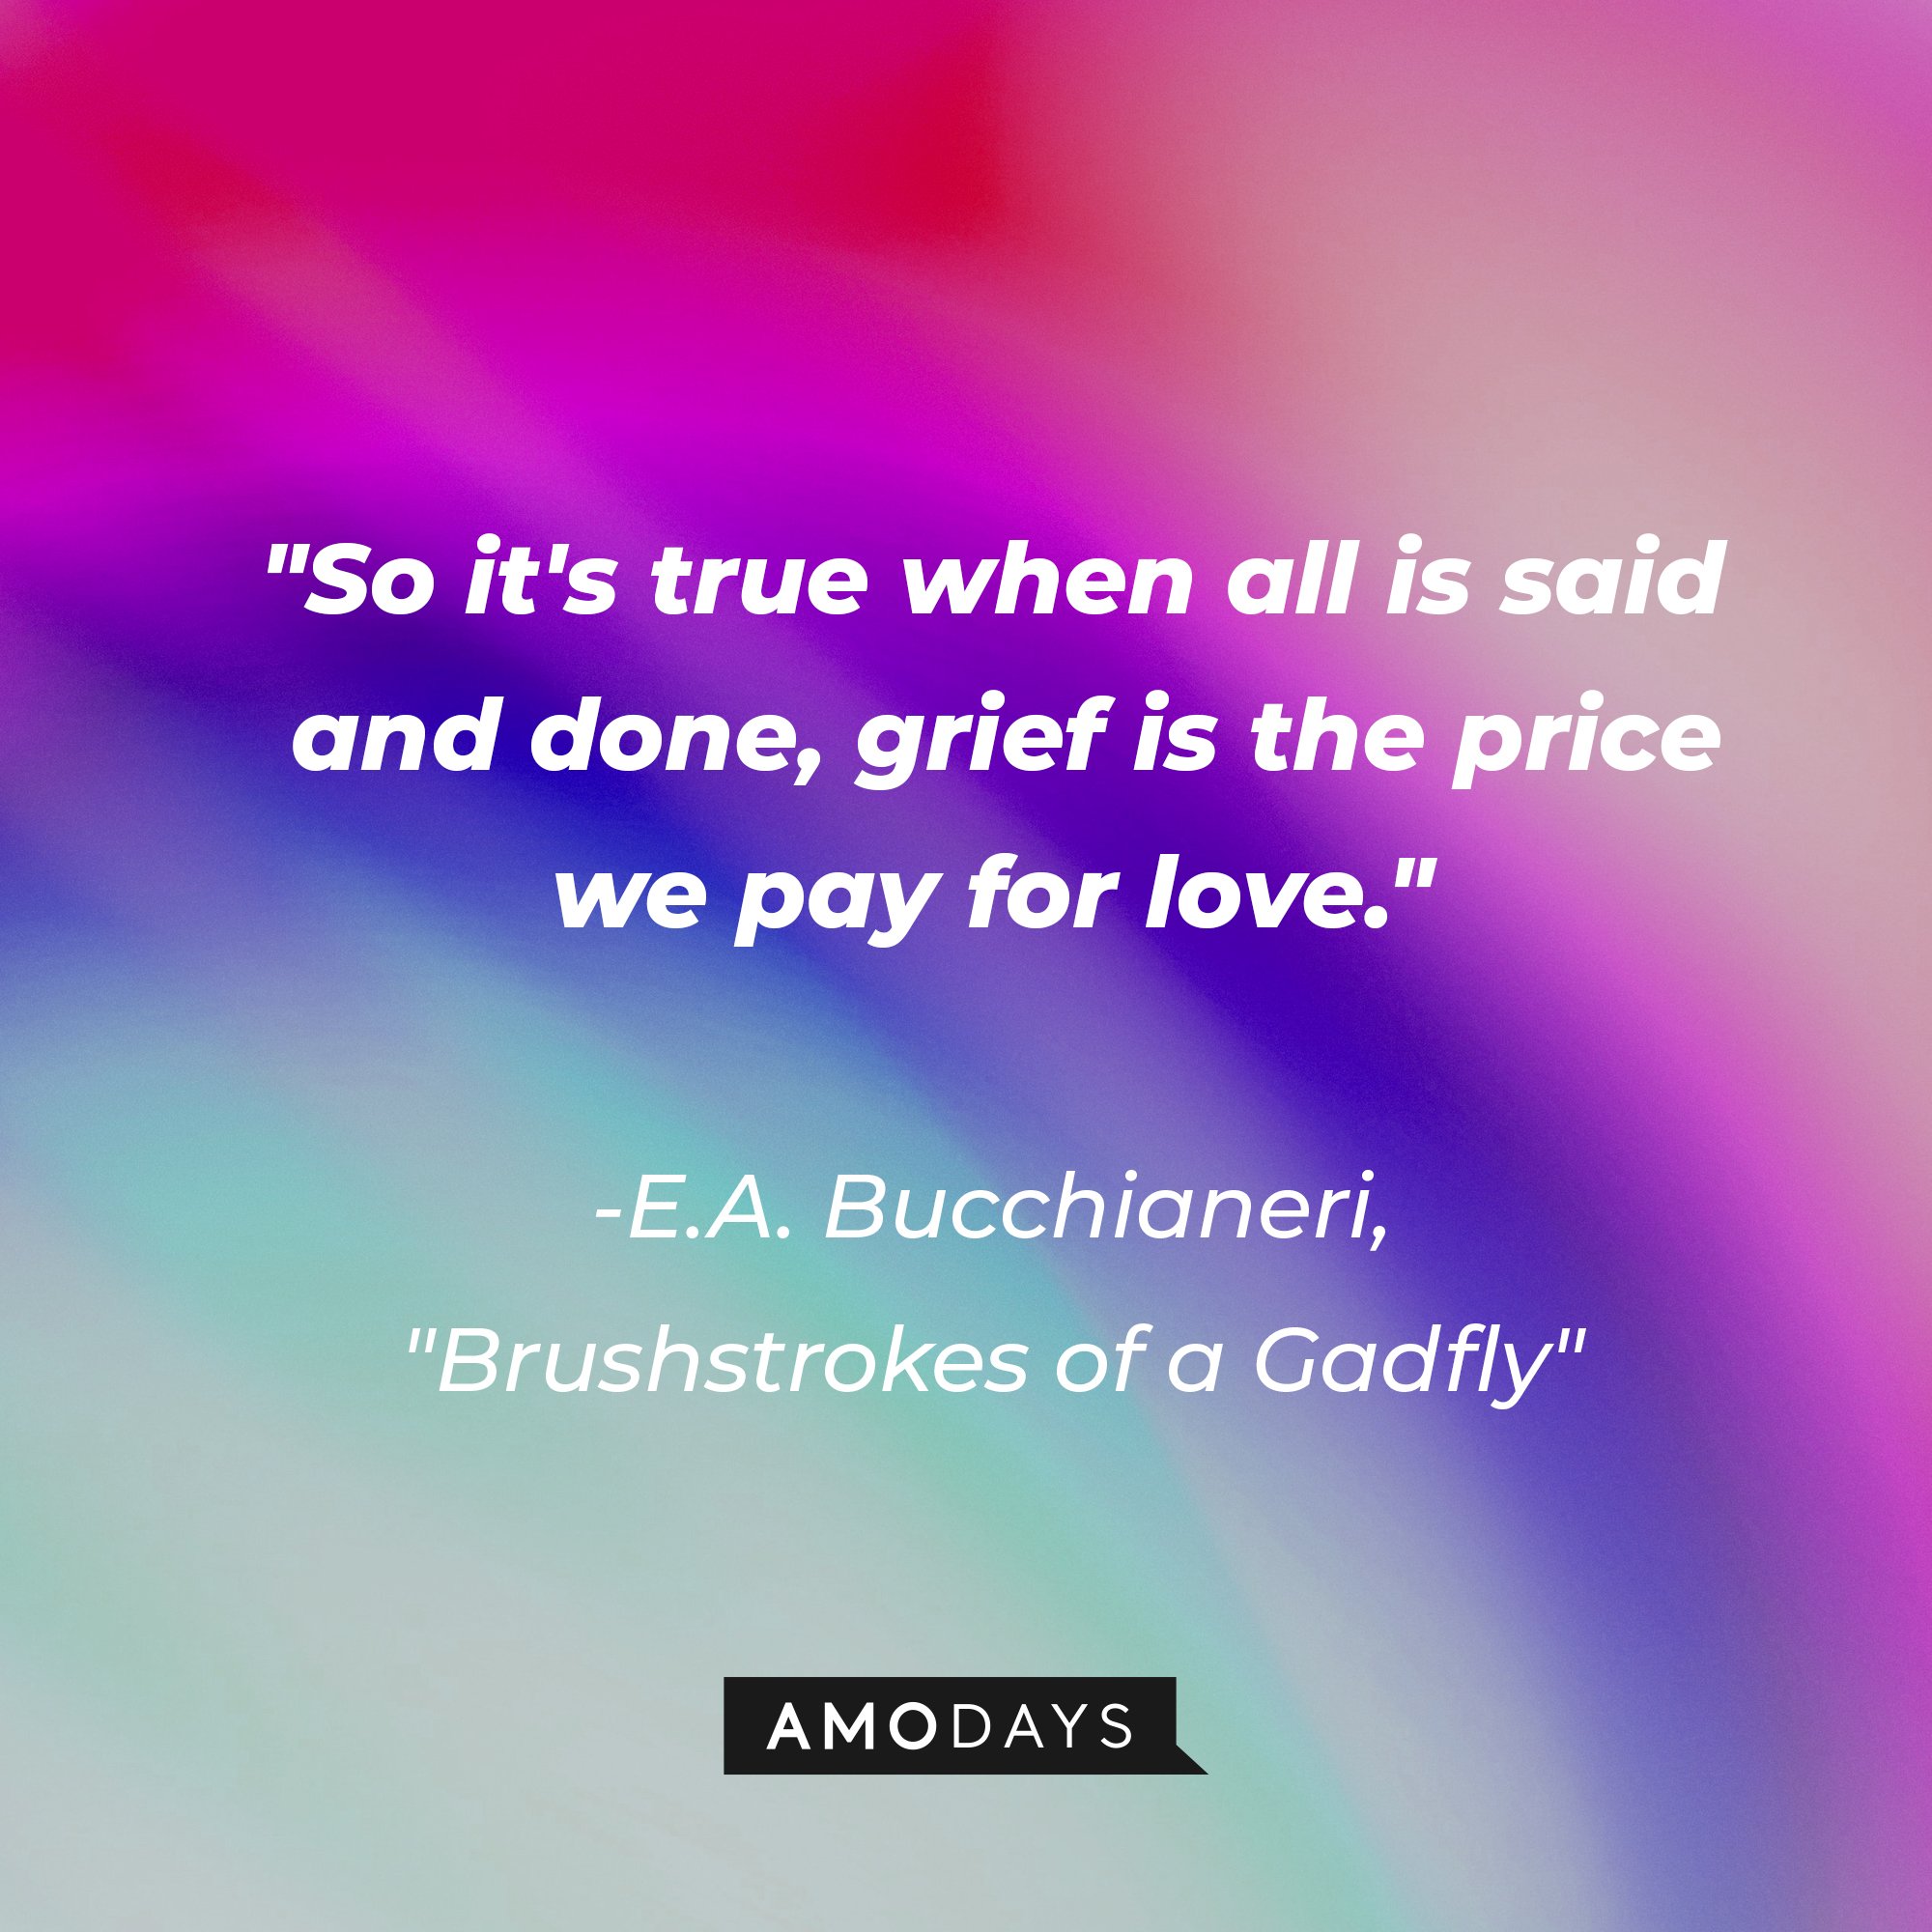 E.A. Bucchianeri's "Brushstrokes of a Gadfly" quote: "So it's true when all is said and done, grief is the price we pay for love." | Image: AmoDays